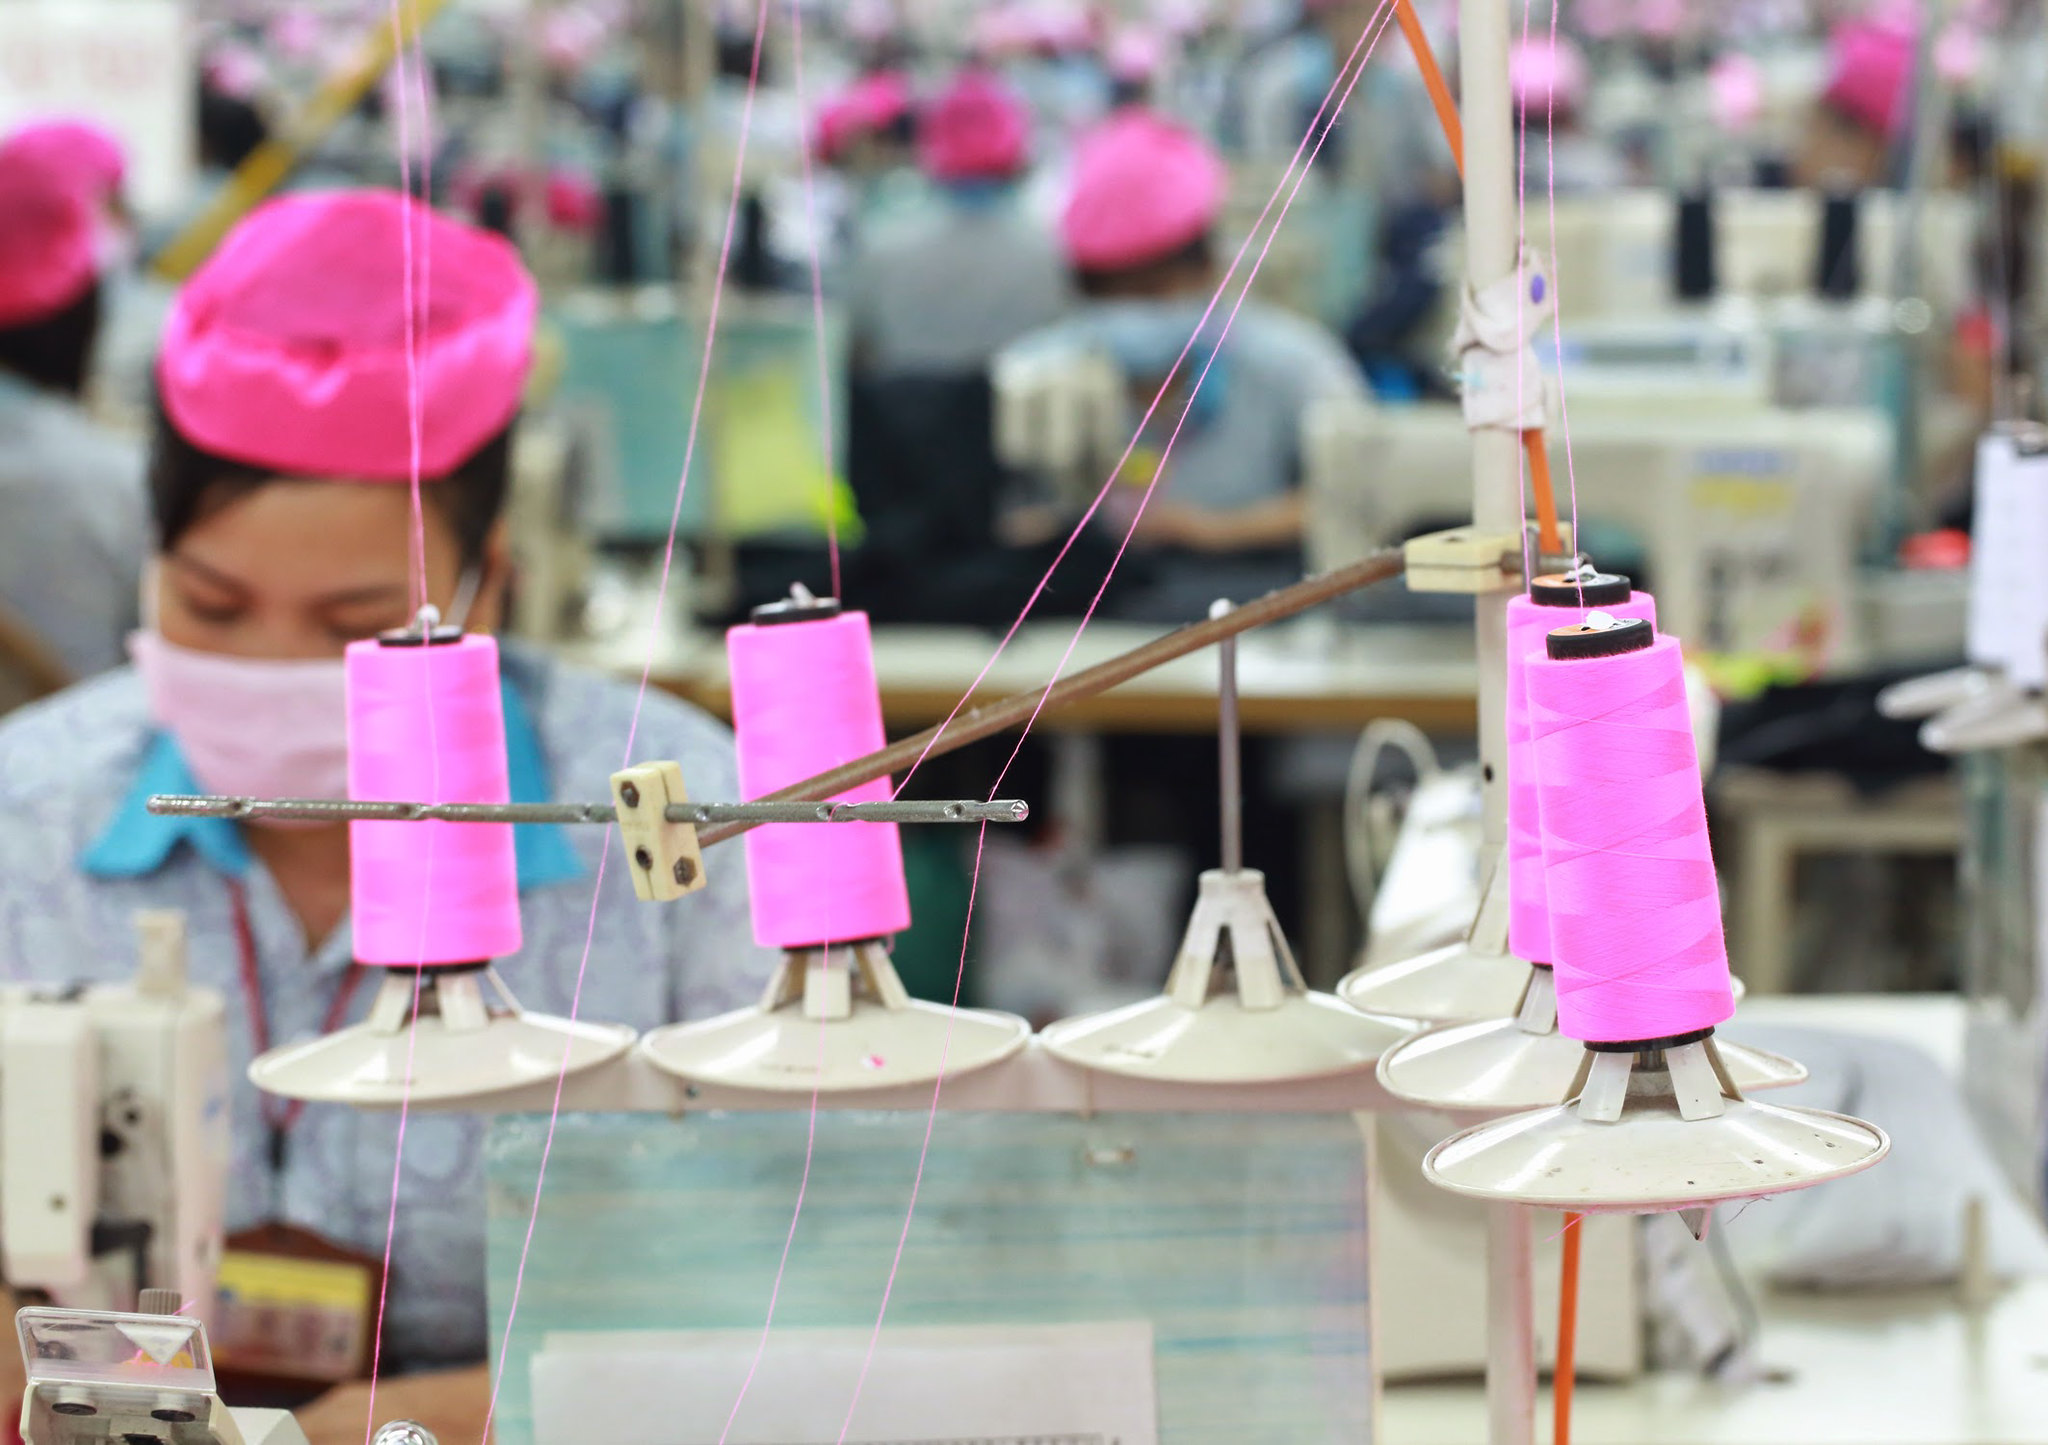 A garment worker at a Better Work factory in Vietnam. Spools of pink thread are visible in the foreground. Credit: Better Work.